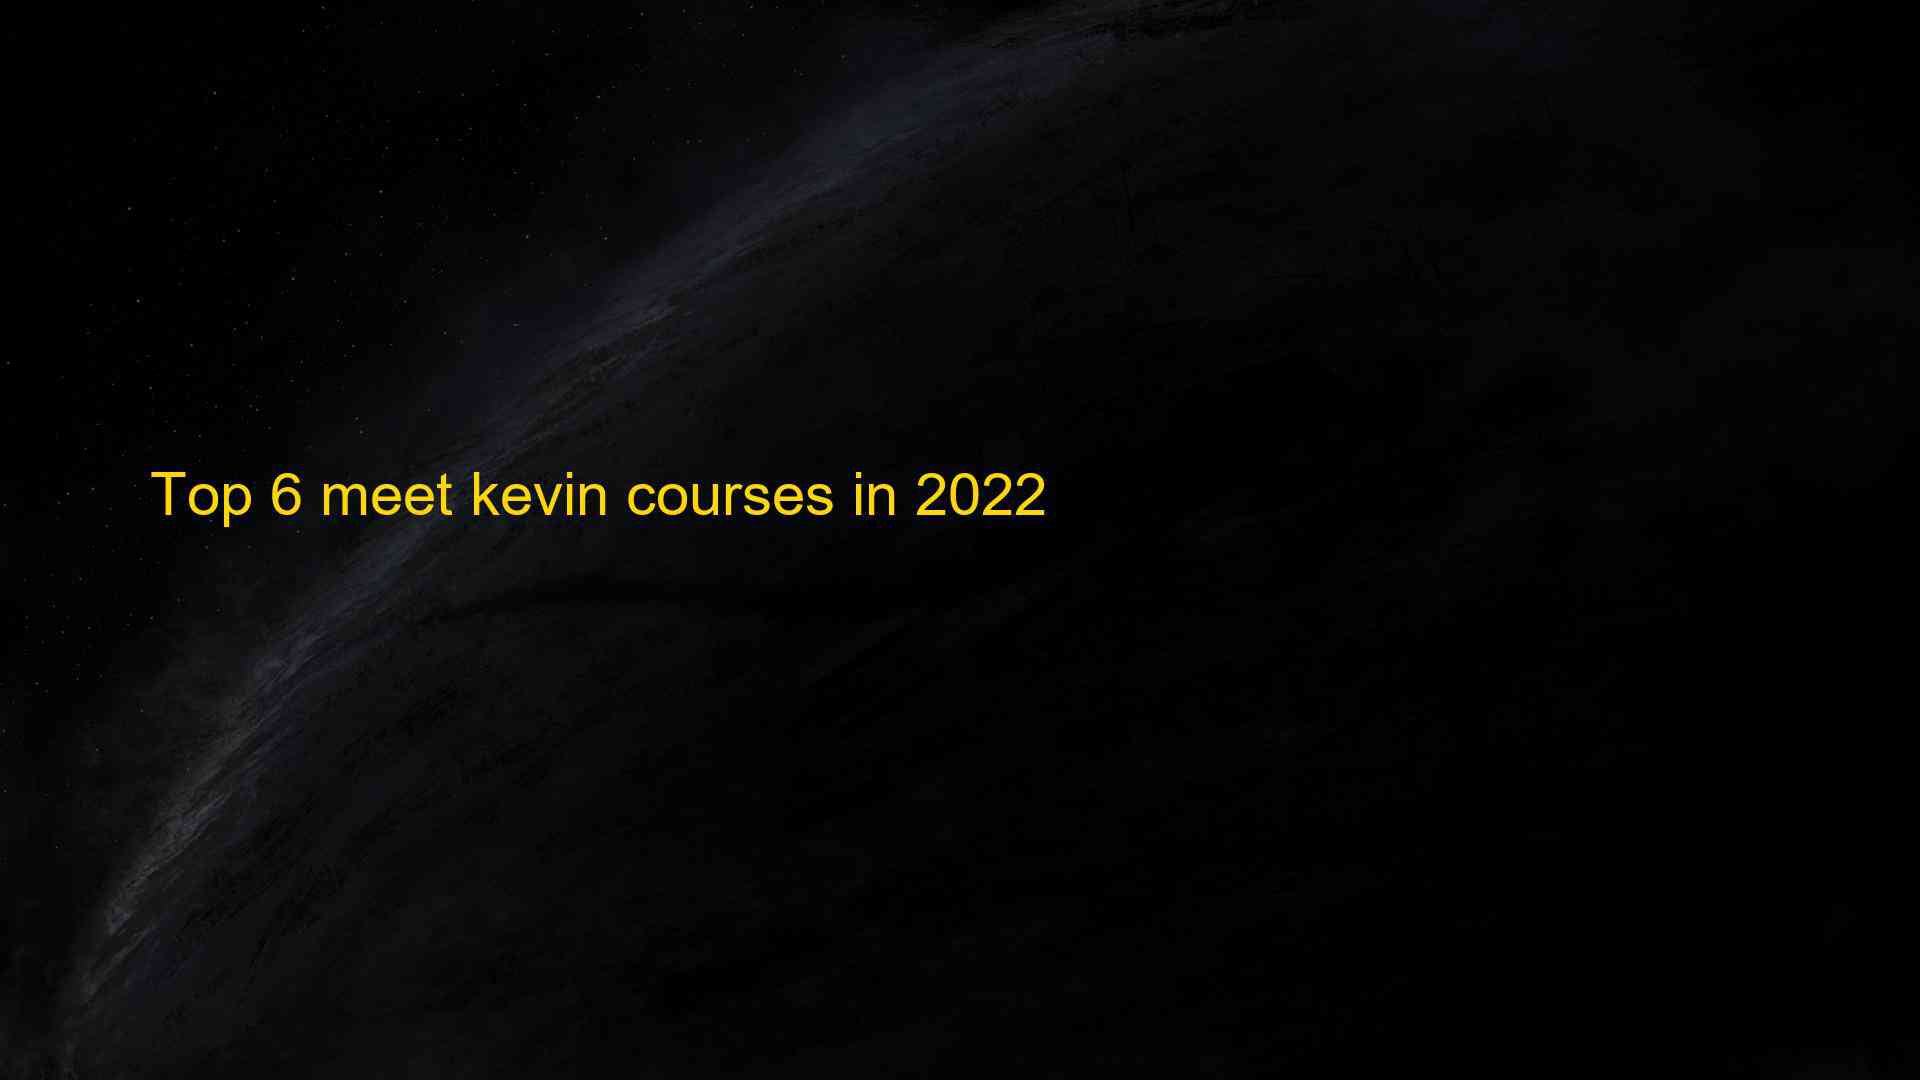 Top 6 meet kevin courses in 2022 1660796950